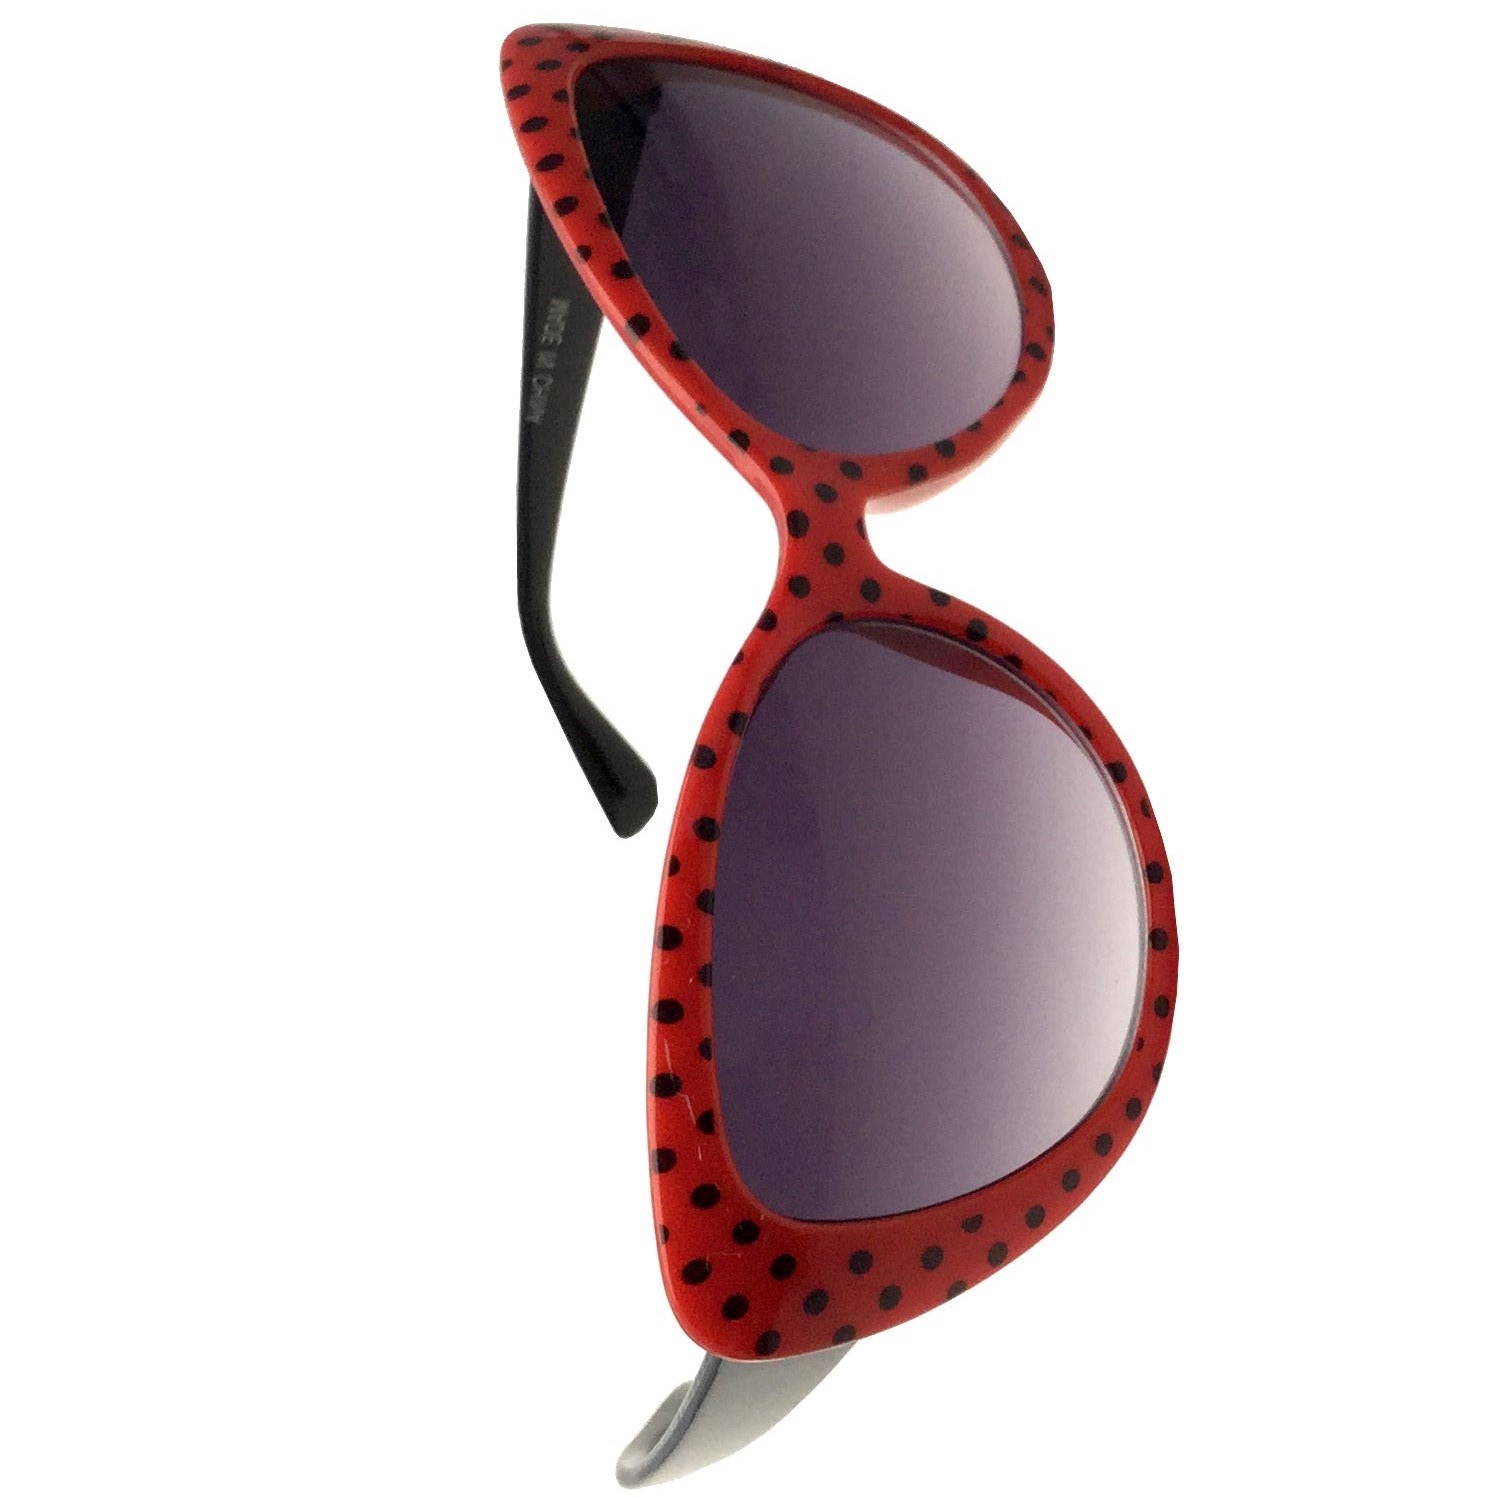 grinderPUNCH GIRLS Kids Fashion Sunglasses Cat Eye Polka Dot 50s/60s Retro Vintage Style Age 2-12 Red - image 5 of 5